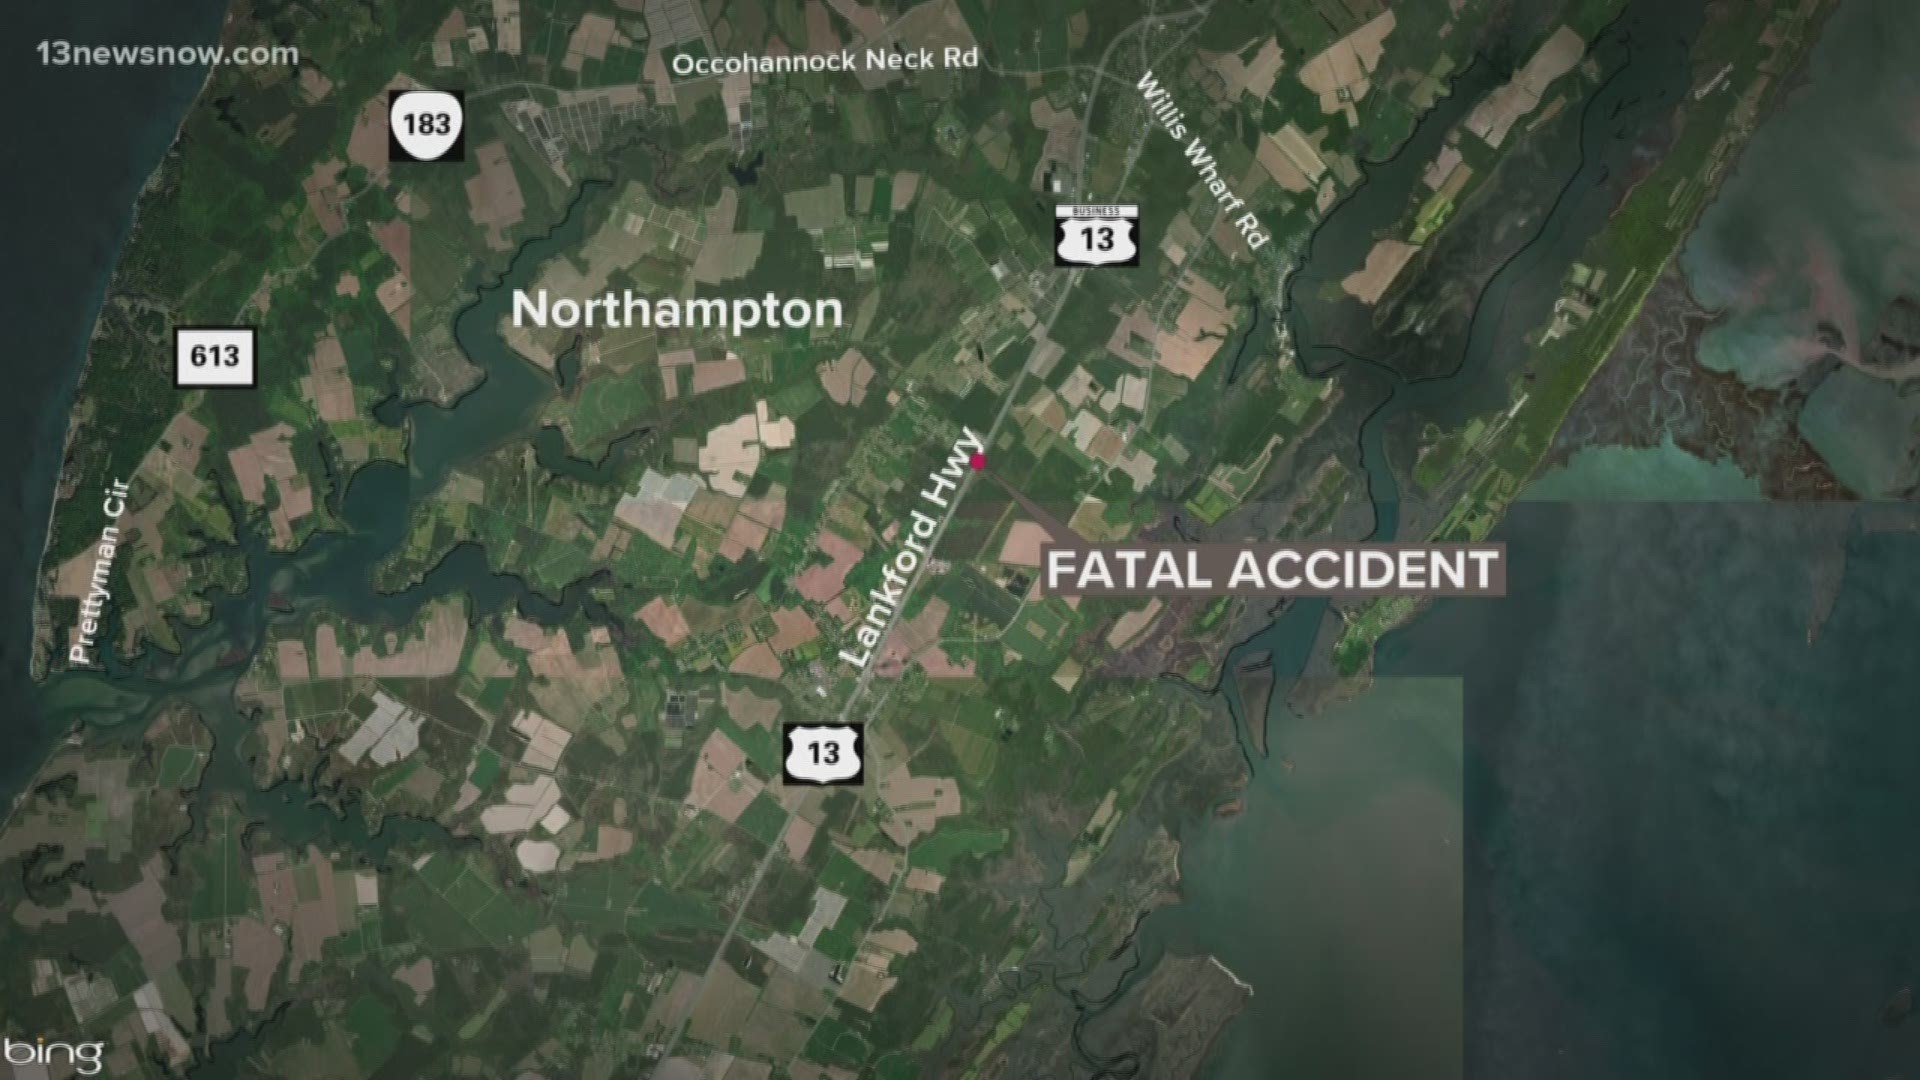 One man died after the car he was driving crashed into a tractor-trailer head-on on Route 13 in Northampton County.